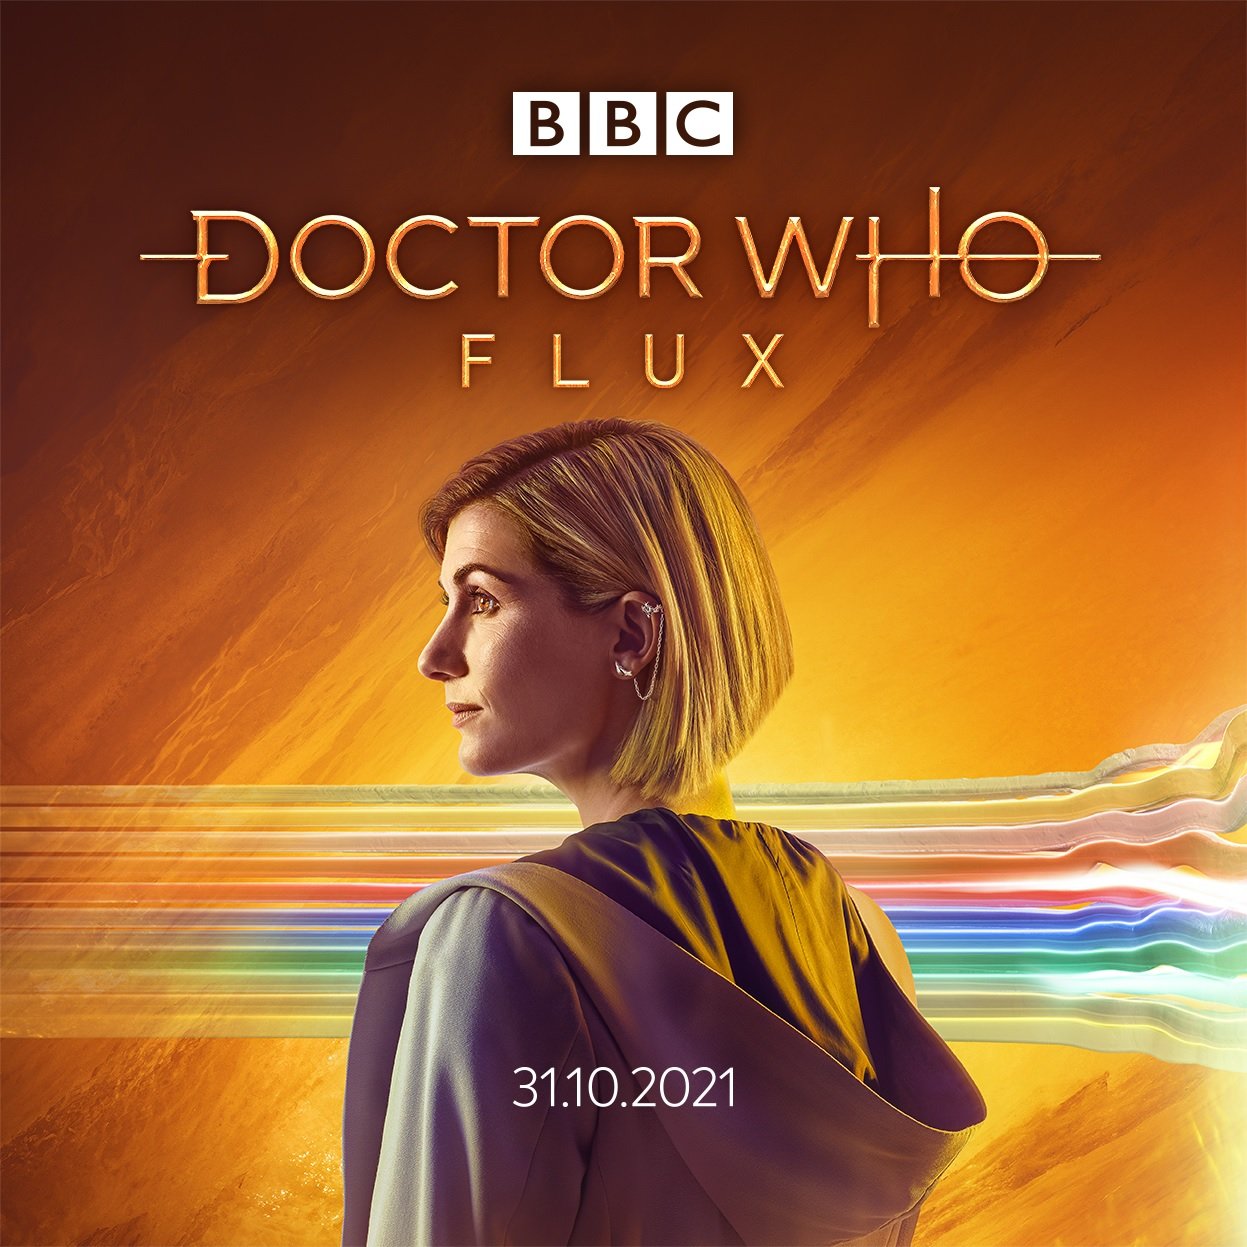 Doctor Who Series 13: Final Episode Title and Synopsis for Flux Revealed